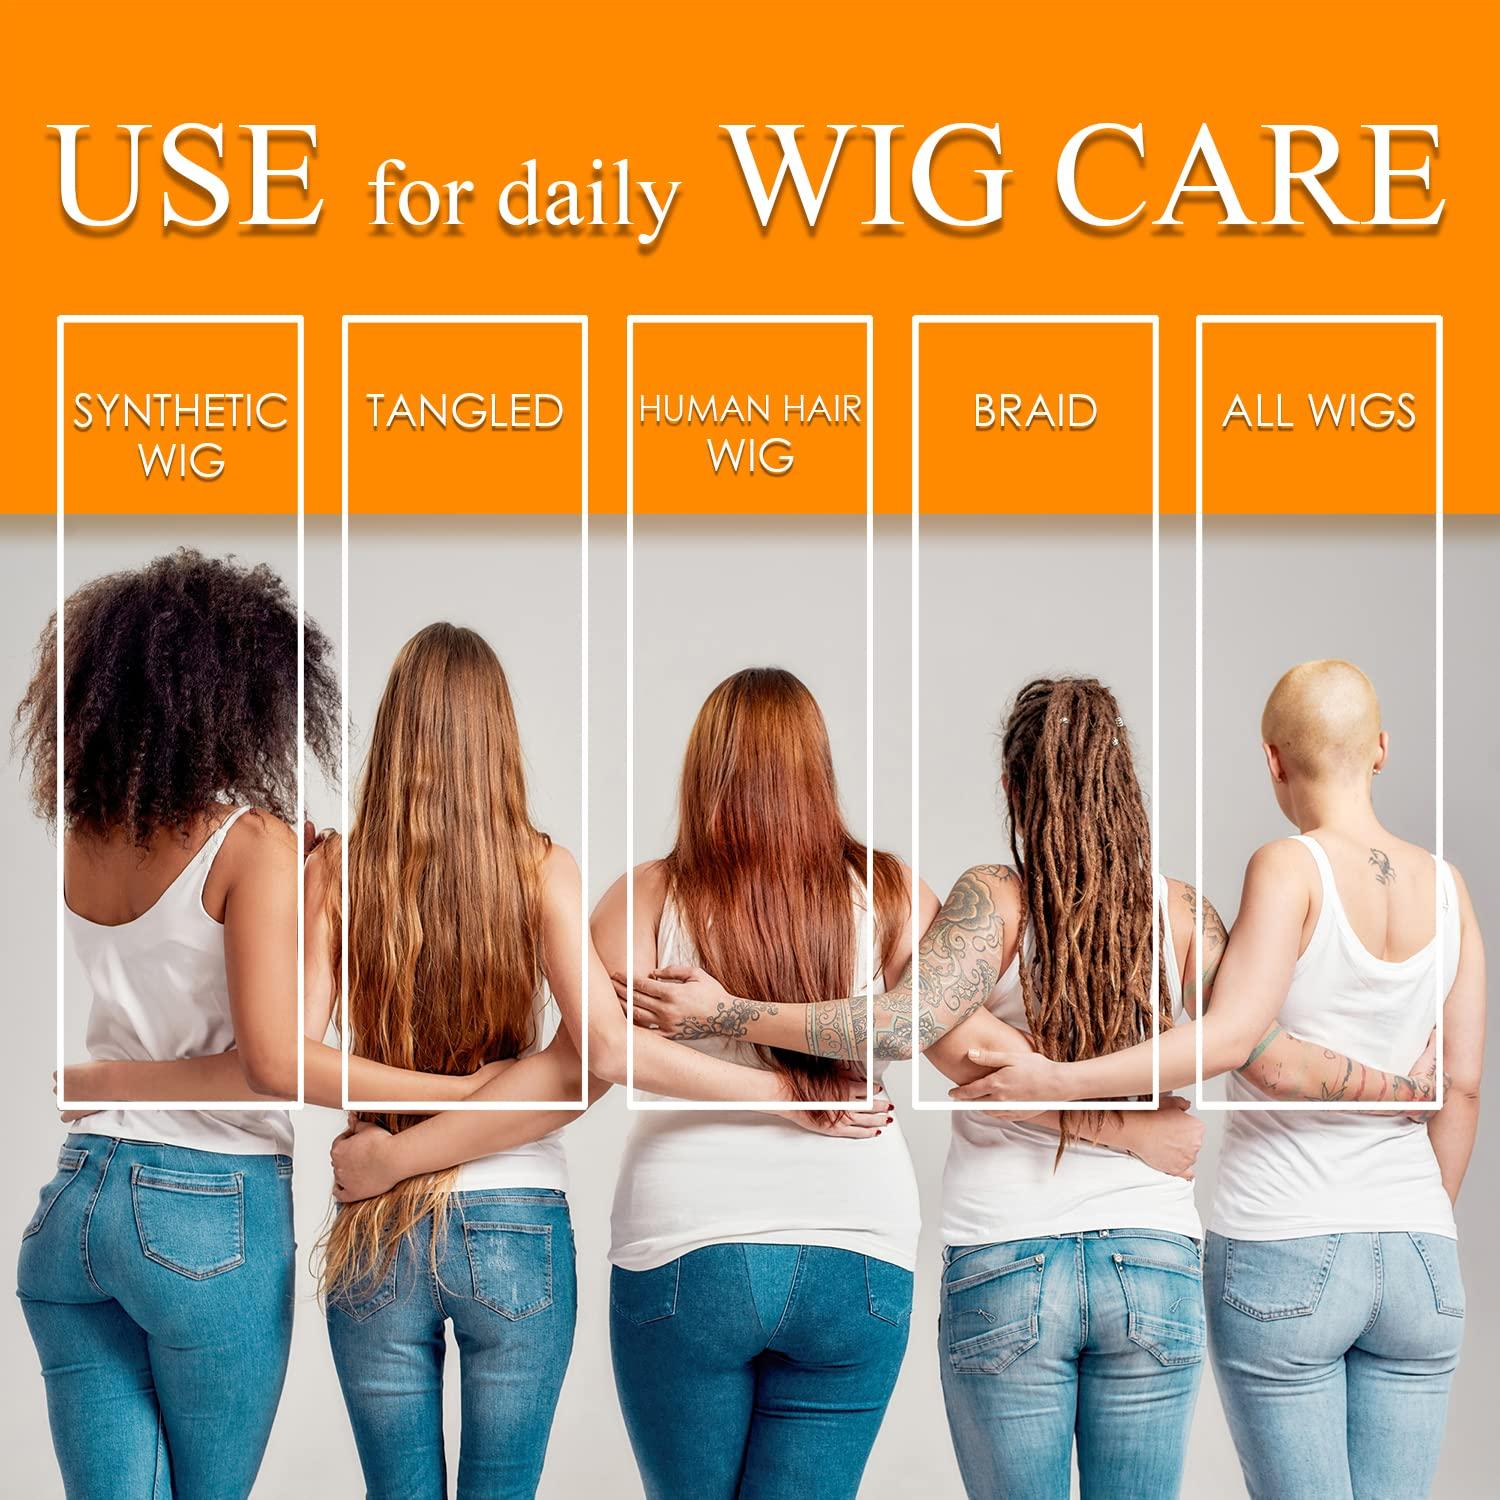 Awesome Human Hair Wig Shampoo, pH5, Wig Care Solution, Adds